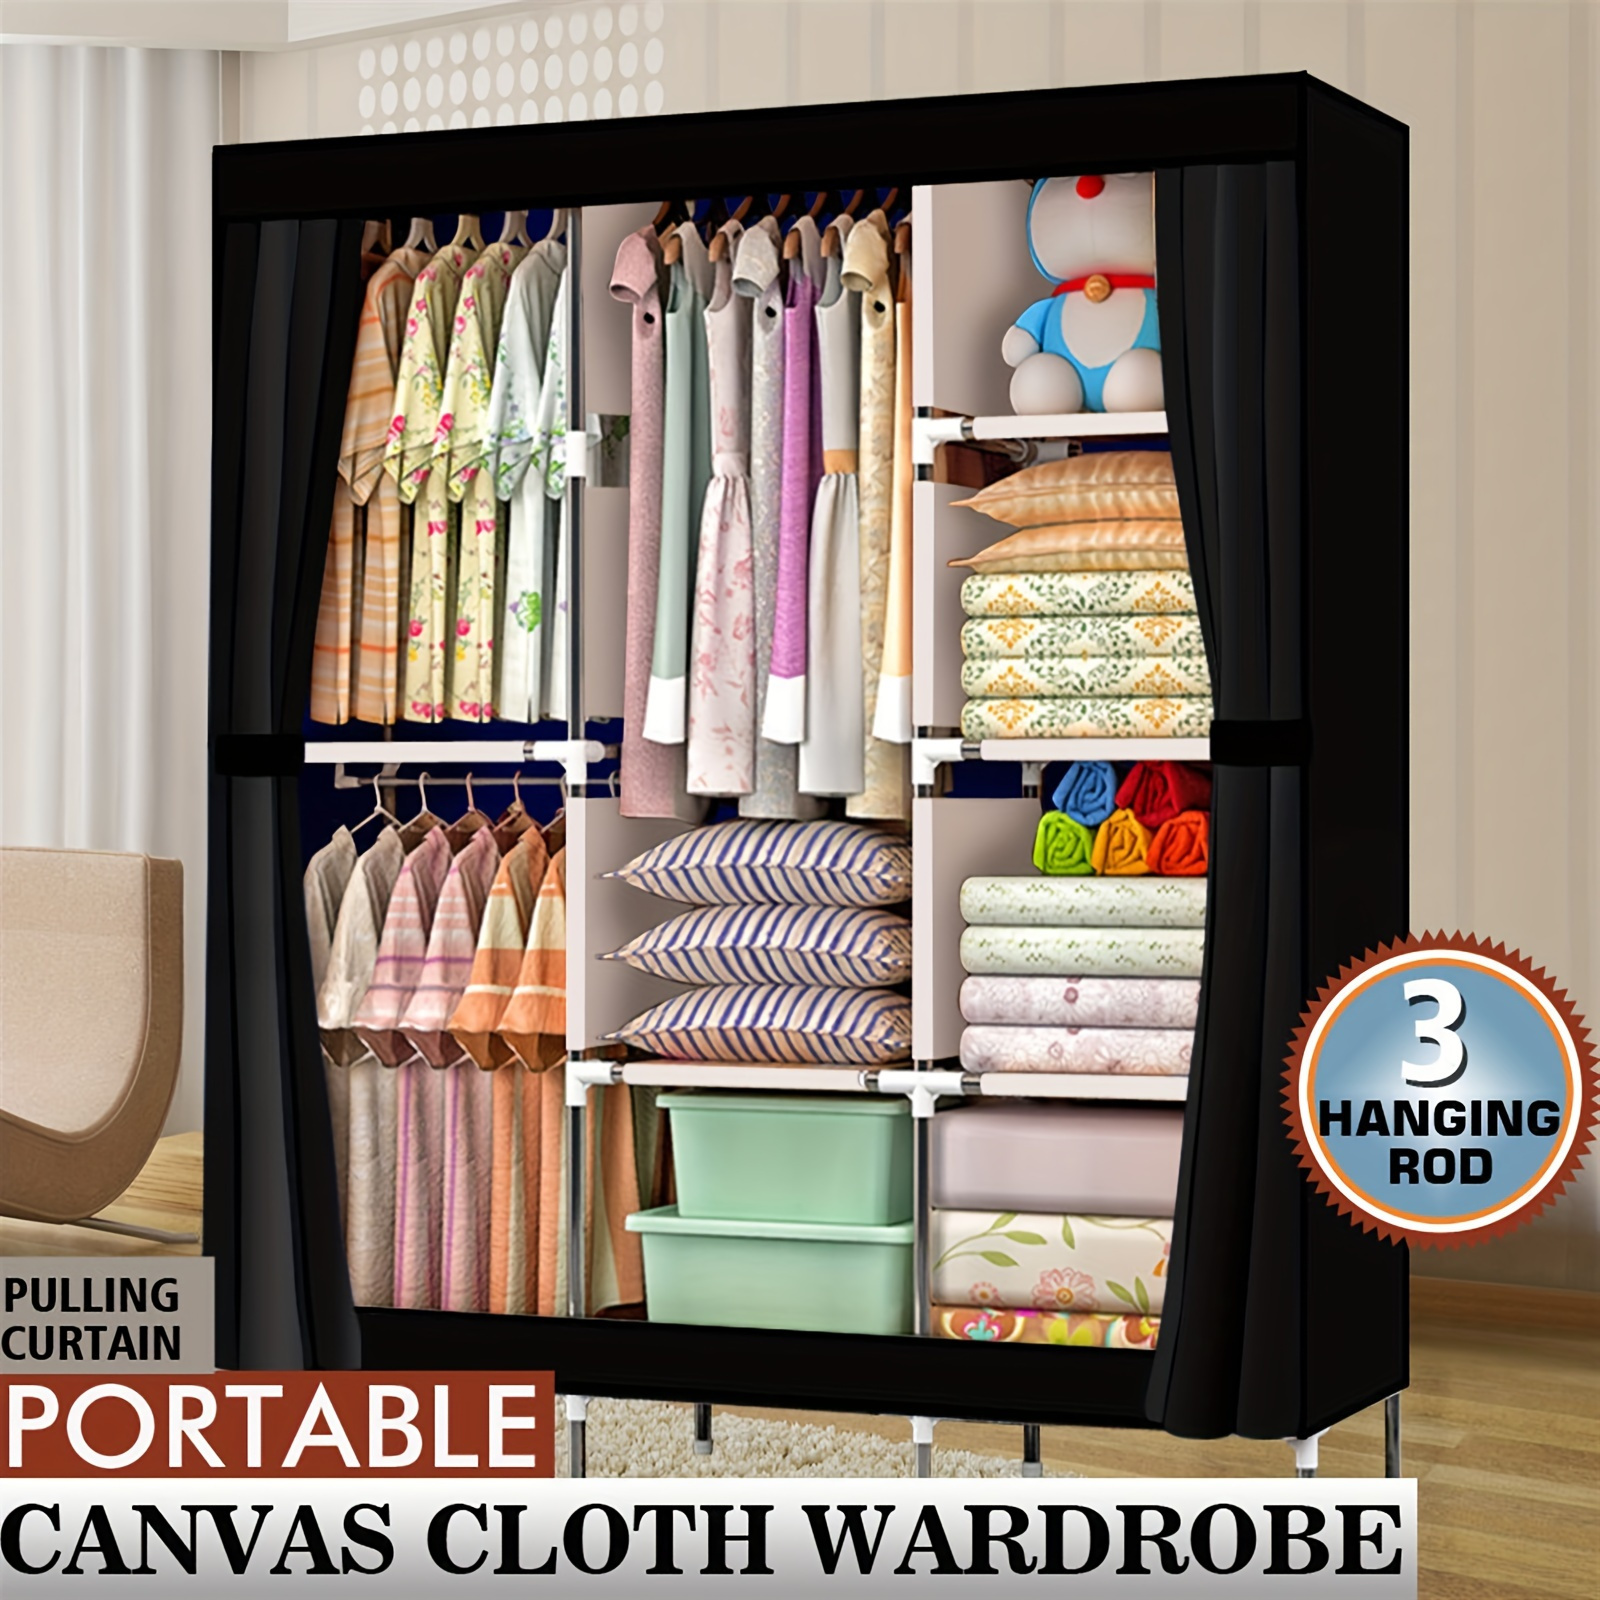 

Simple Wardrobe Non-woven Wardrobe Large Capacity 4 Layers 8 Grids With Cloth Sets 3 Hanging Rod Storage Clothing